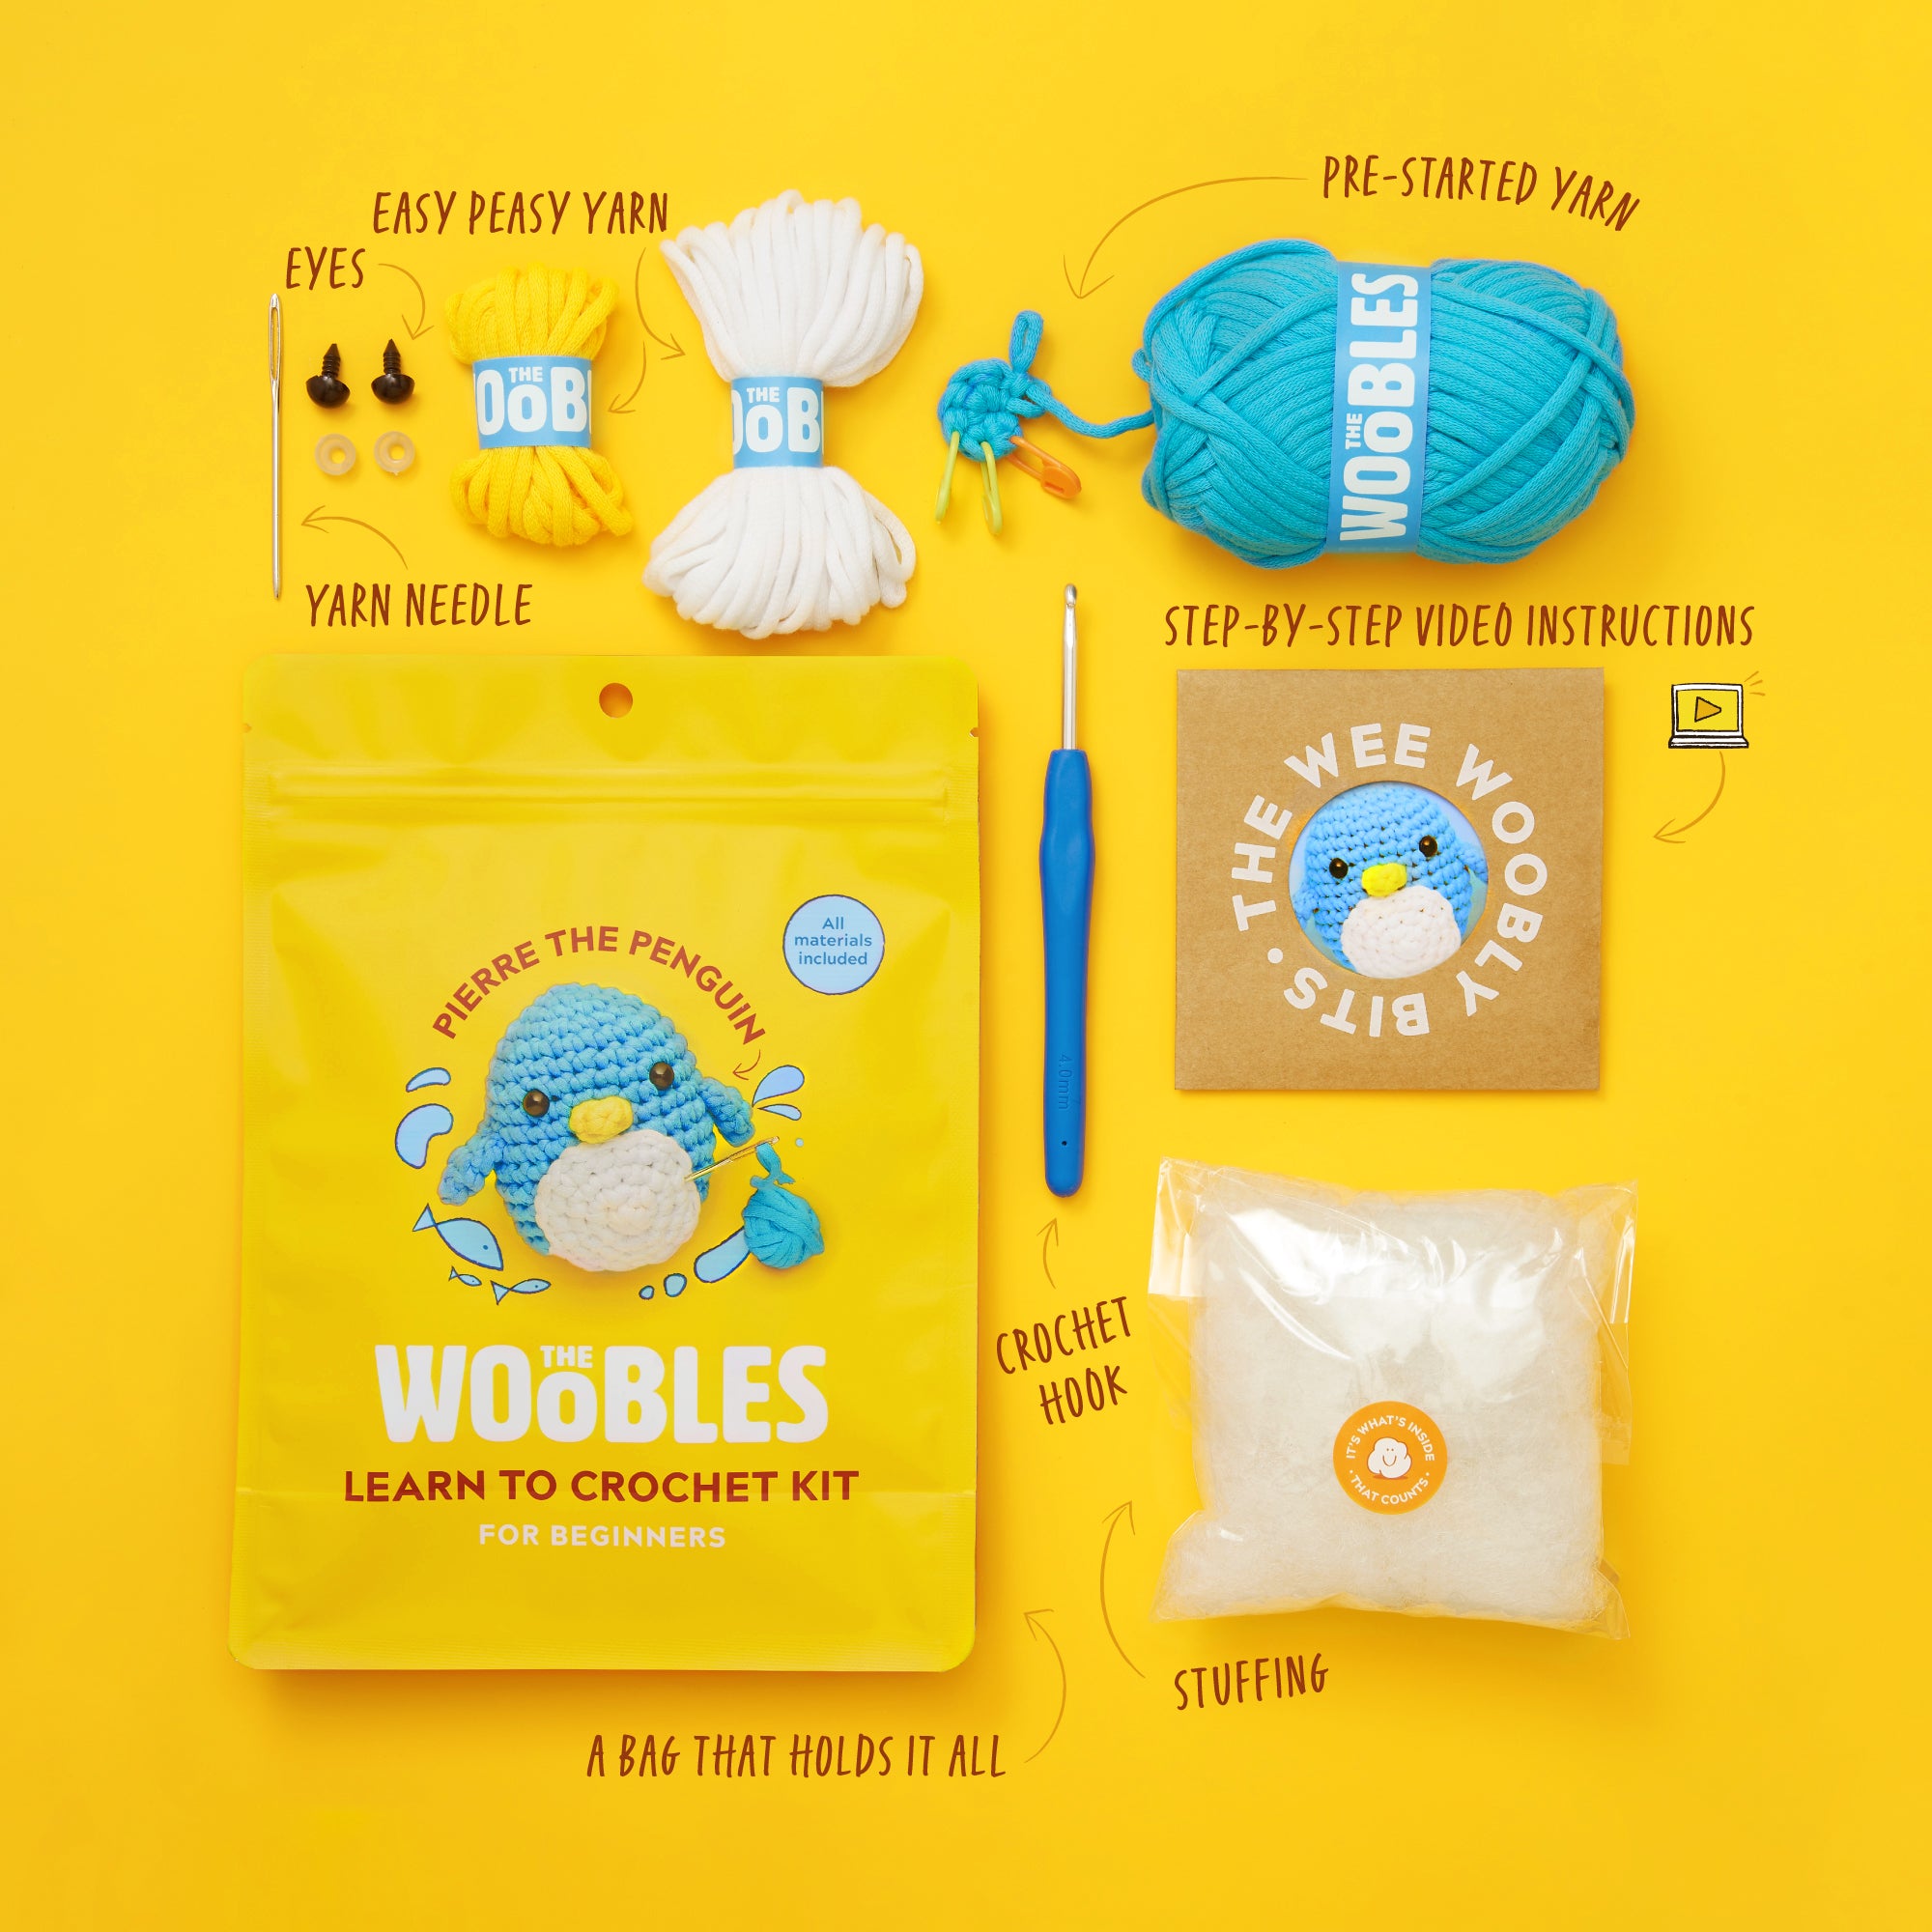 Part 1 ? Learning how to crochet with The Woobles kit